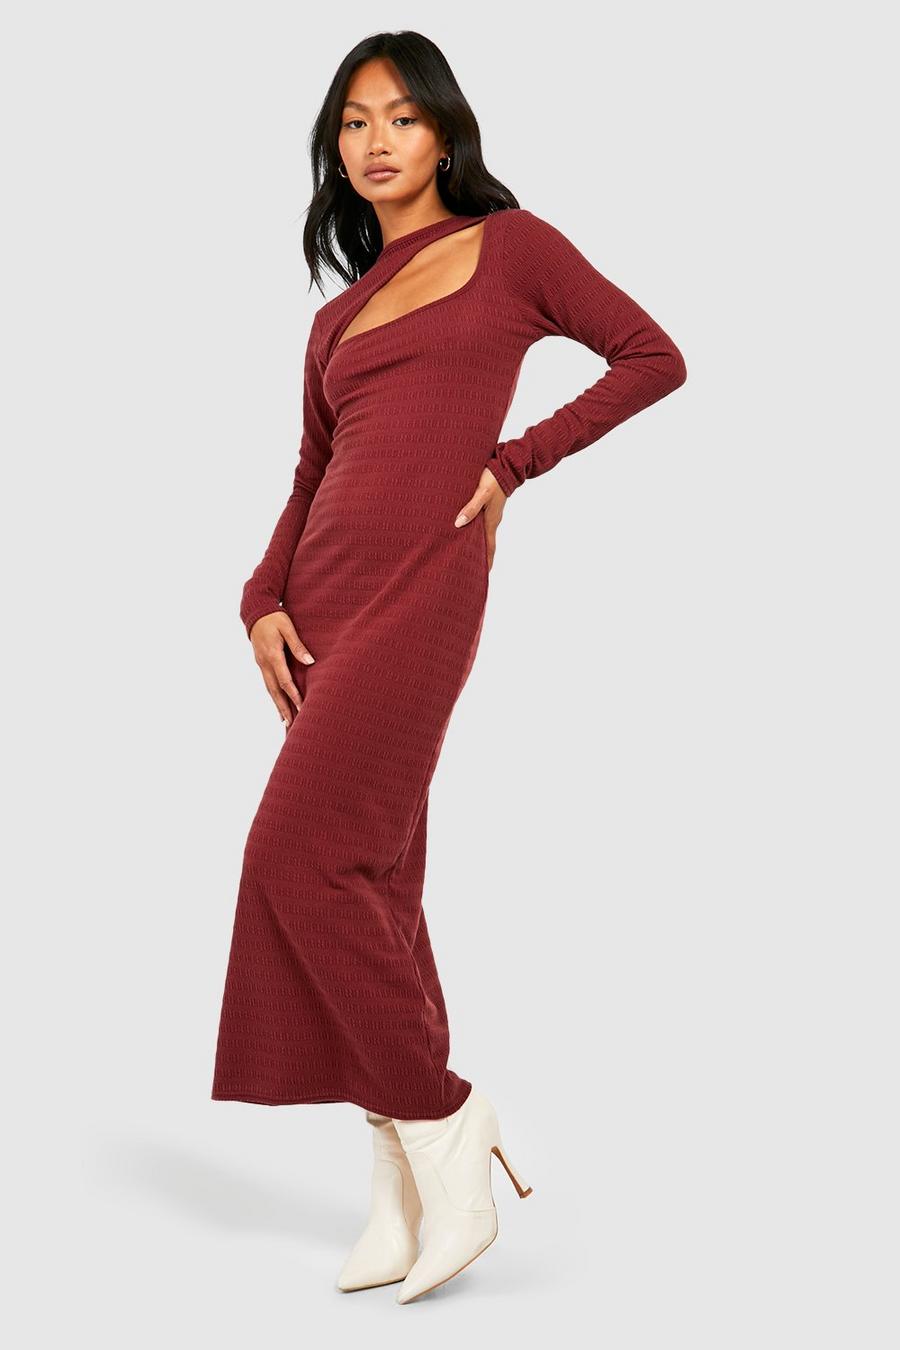 Burgundy Soft Crinkle Texture Cut Out Midaxi Dress